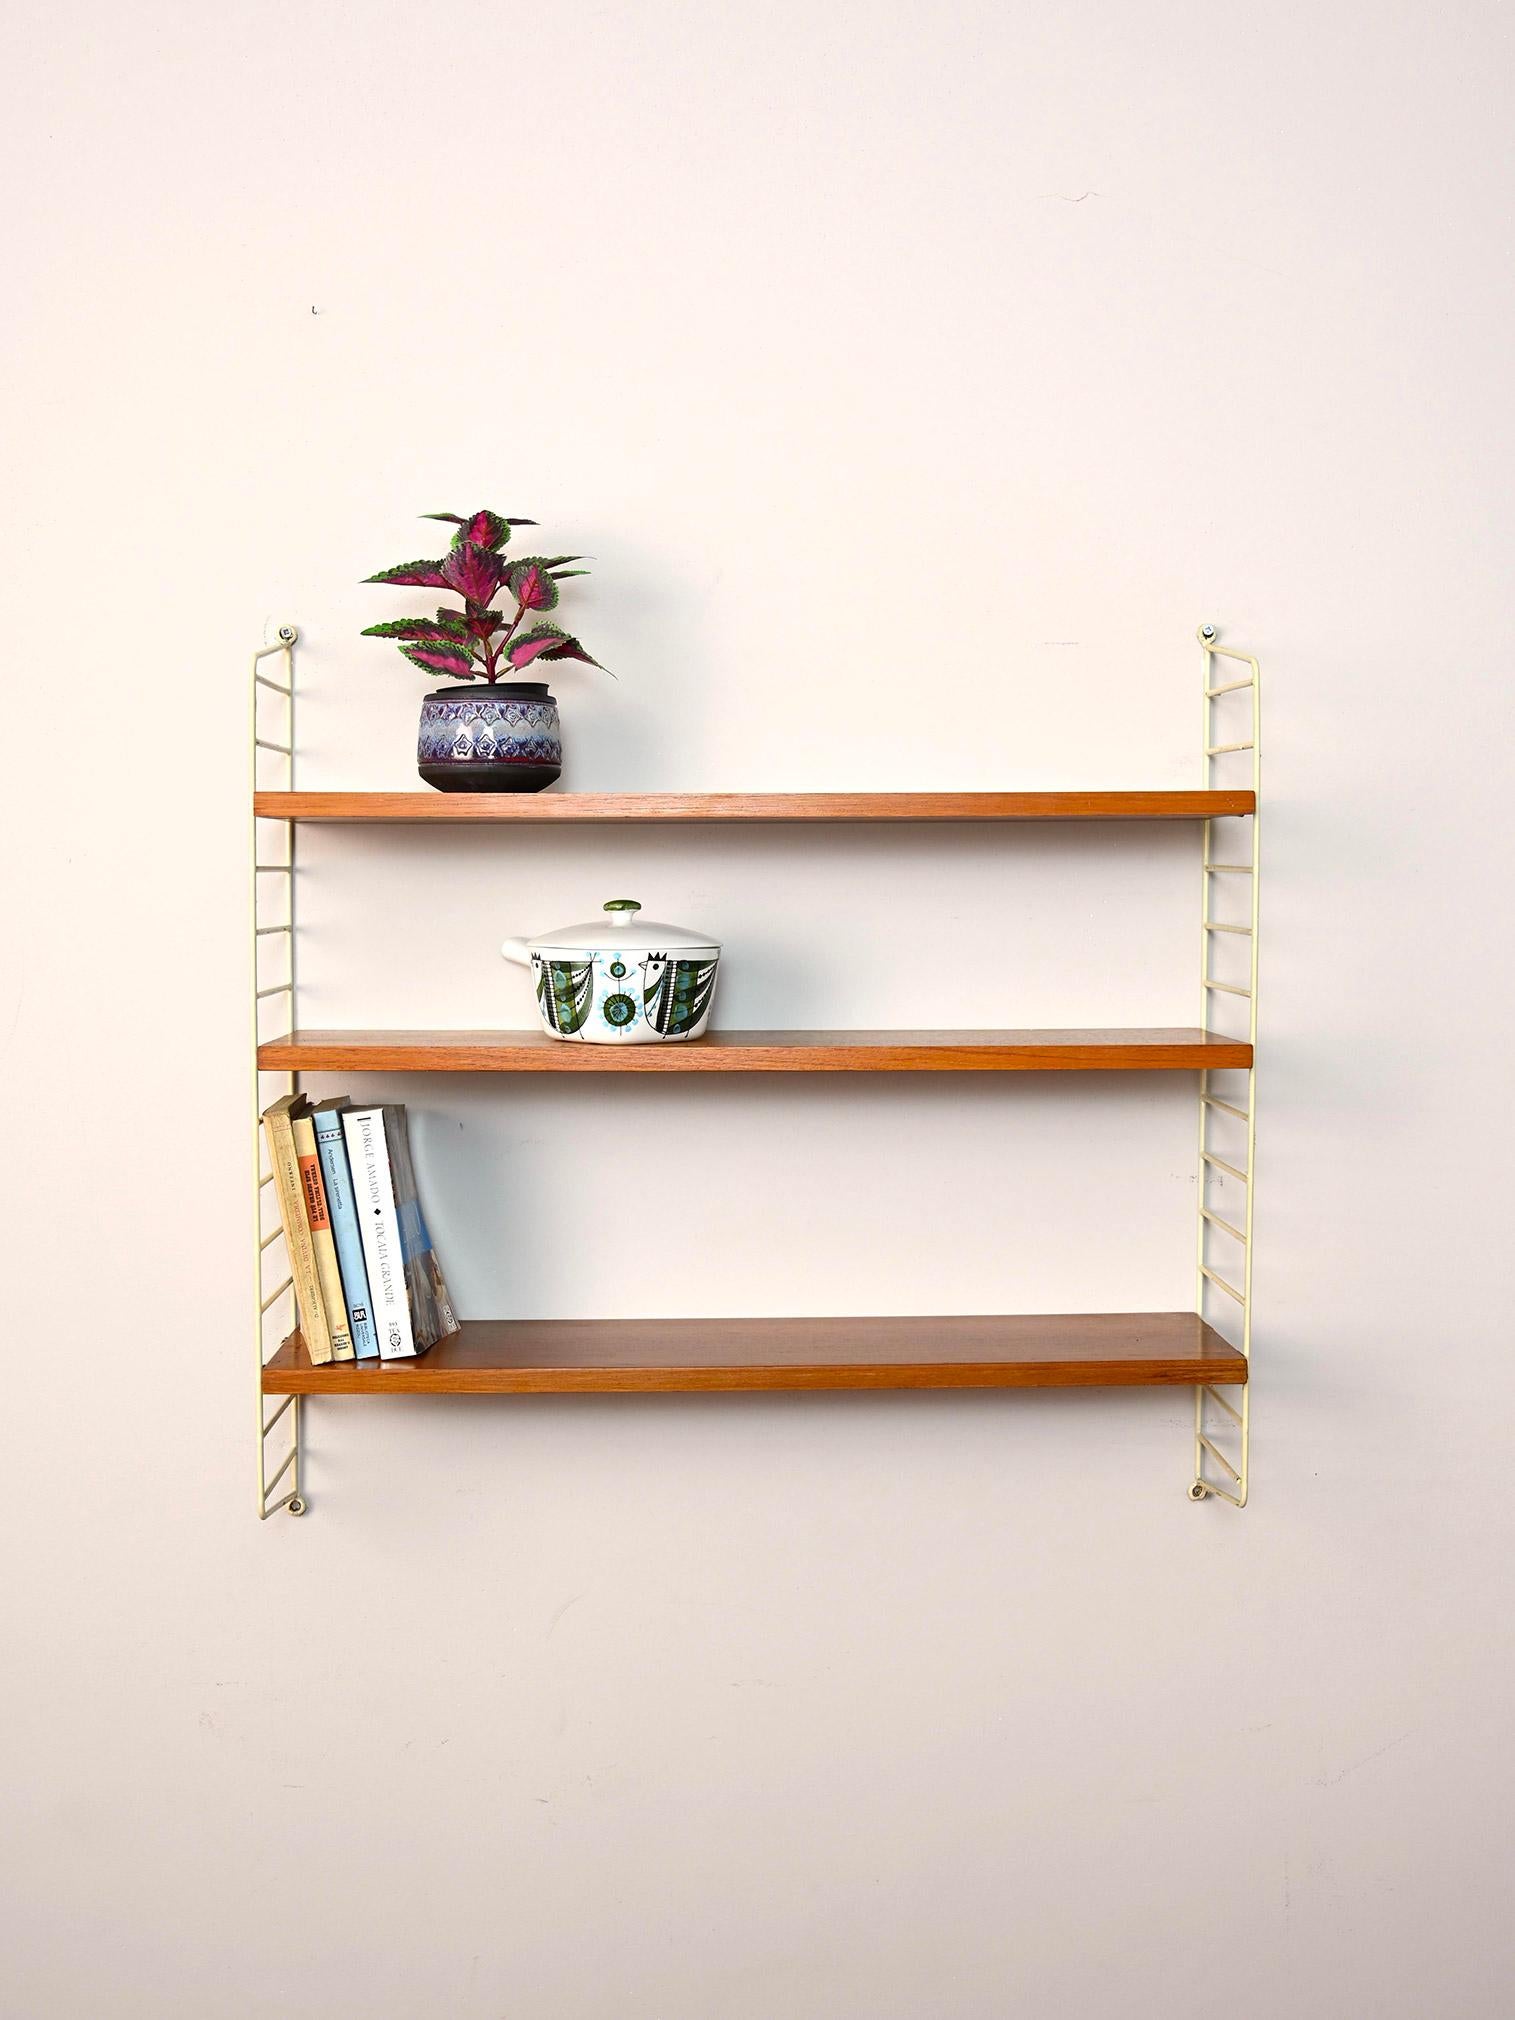 Original 1960s wall bookcase.

This simple shelving system consists of a coated metal side frame to which three teak shelves fit.
Simple and functional it can be hung in different rooms of the house.

Good condition. It has been restored with